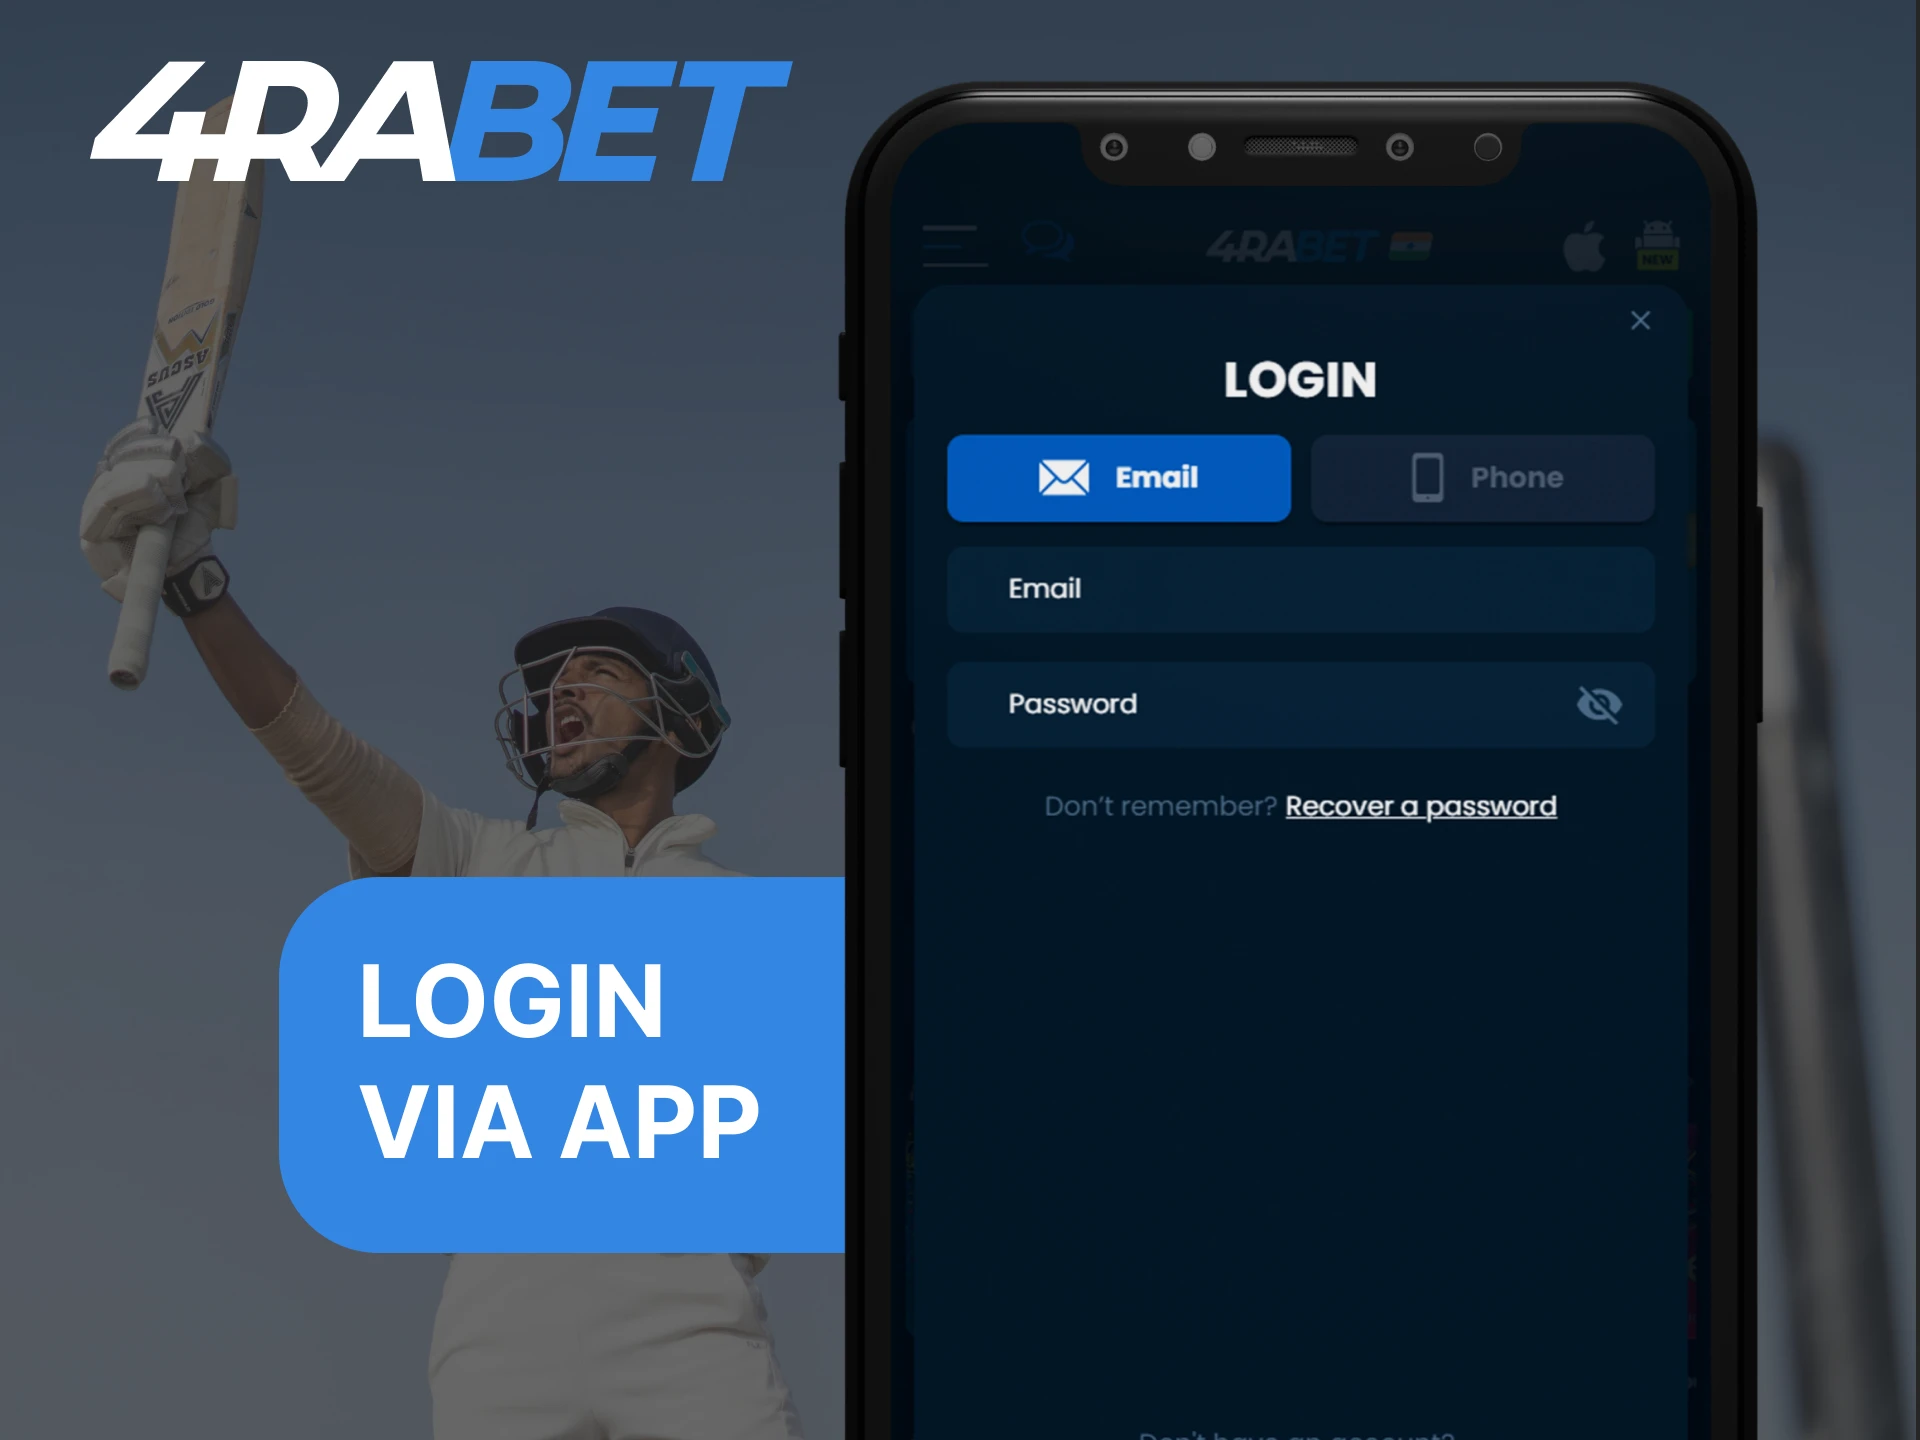 After downloading the 4RaBet mobile app, log in to your account.